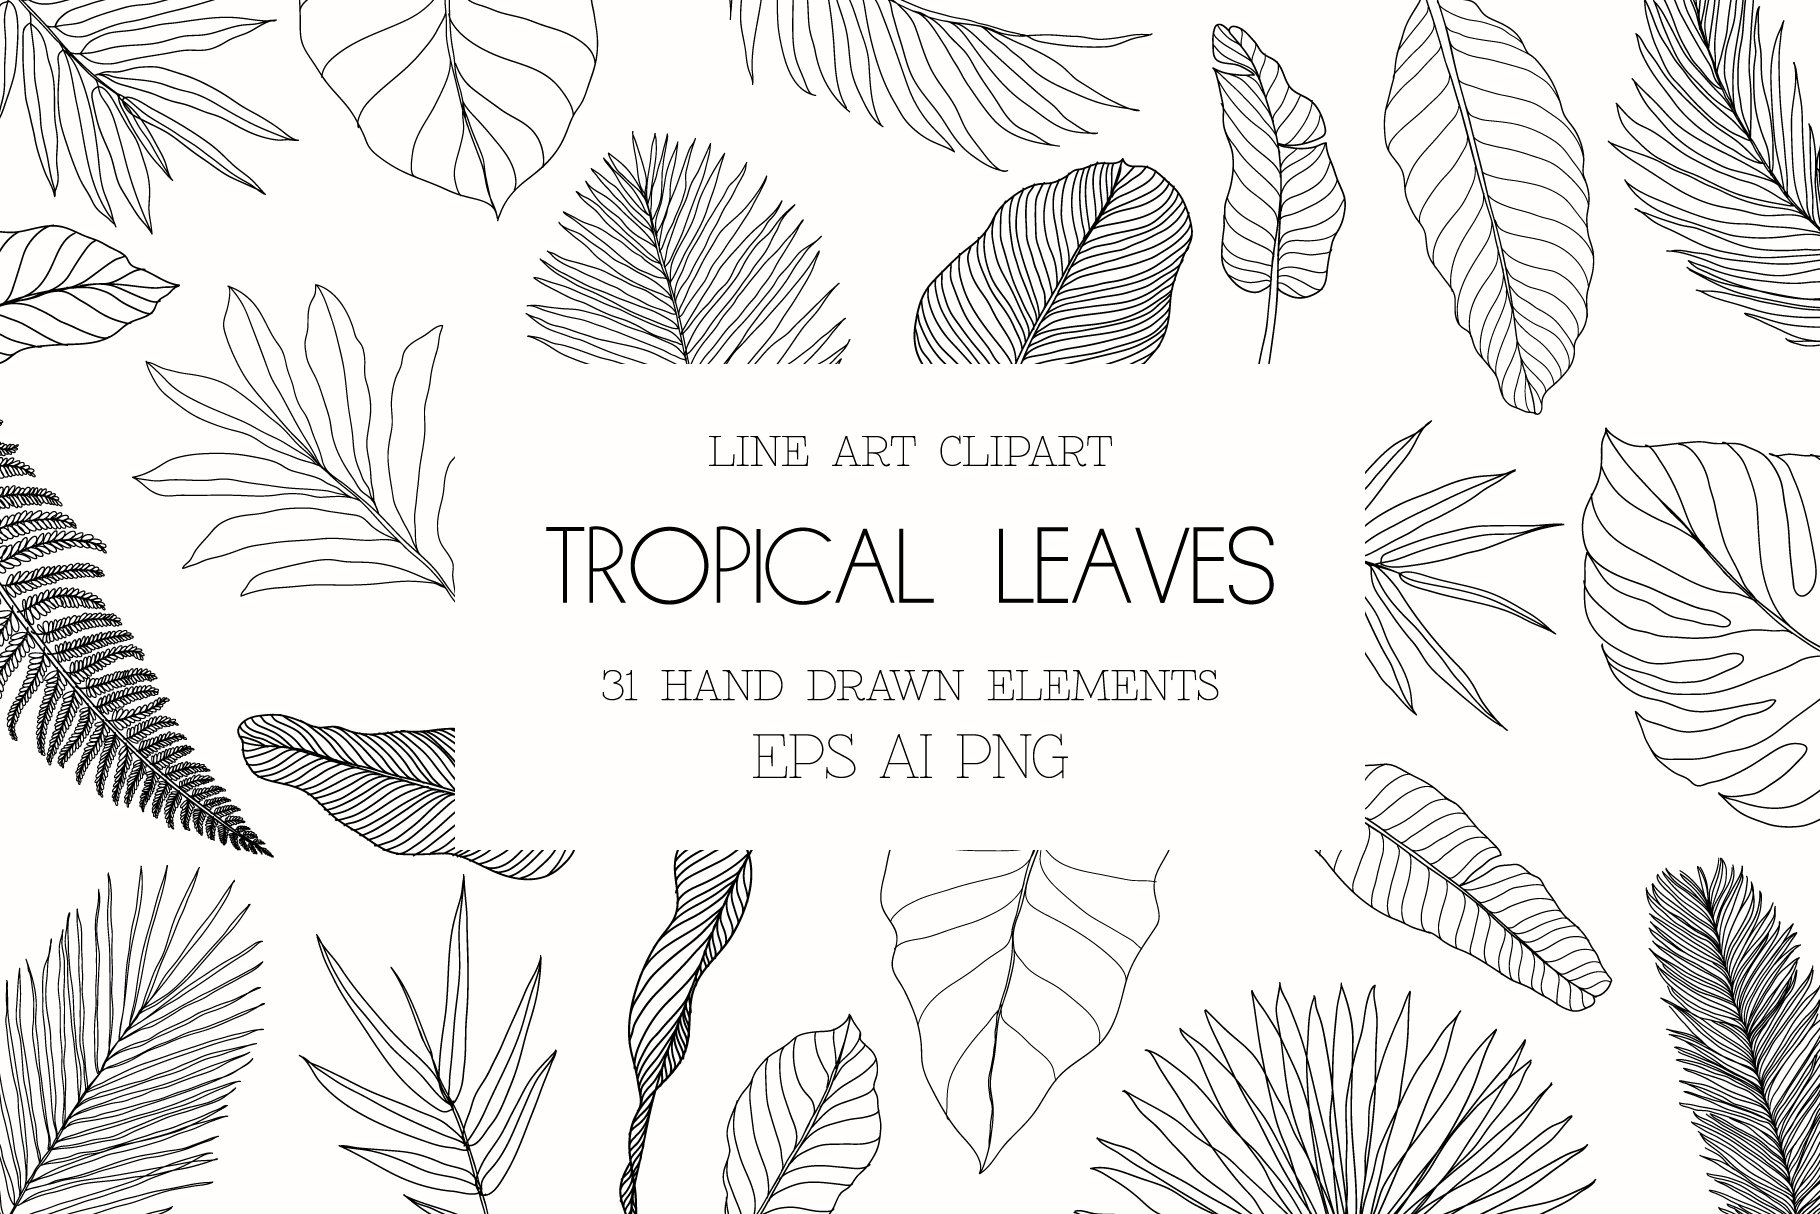 Line Art Tropical Leaves Clipart. cover image.